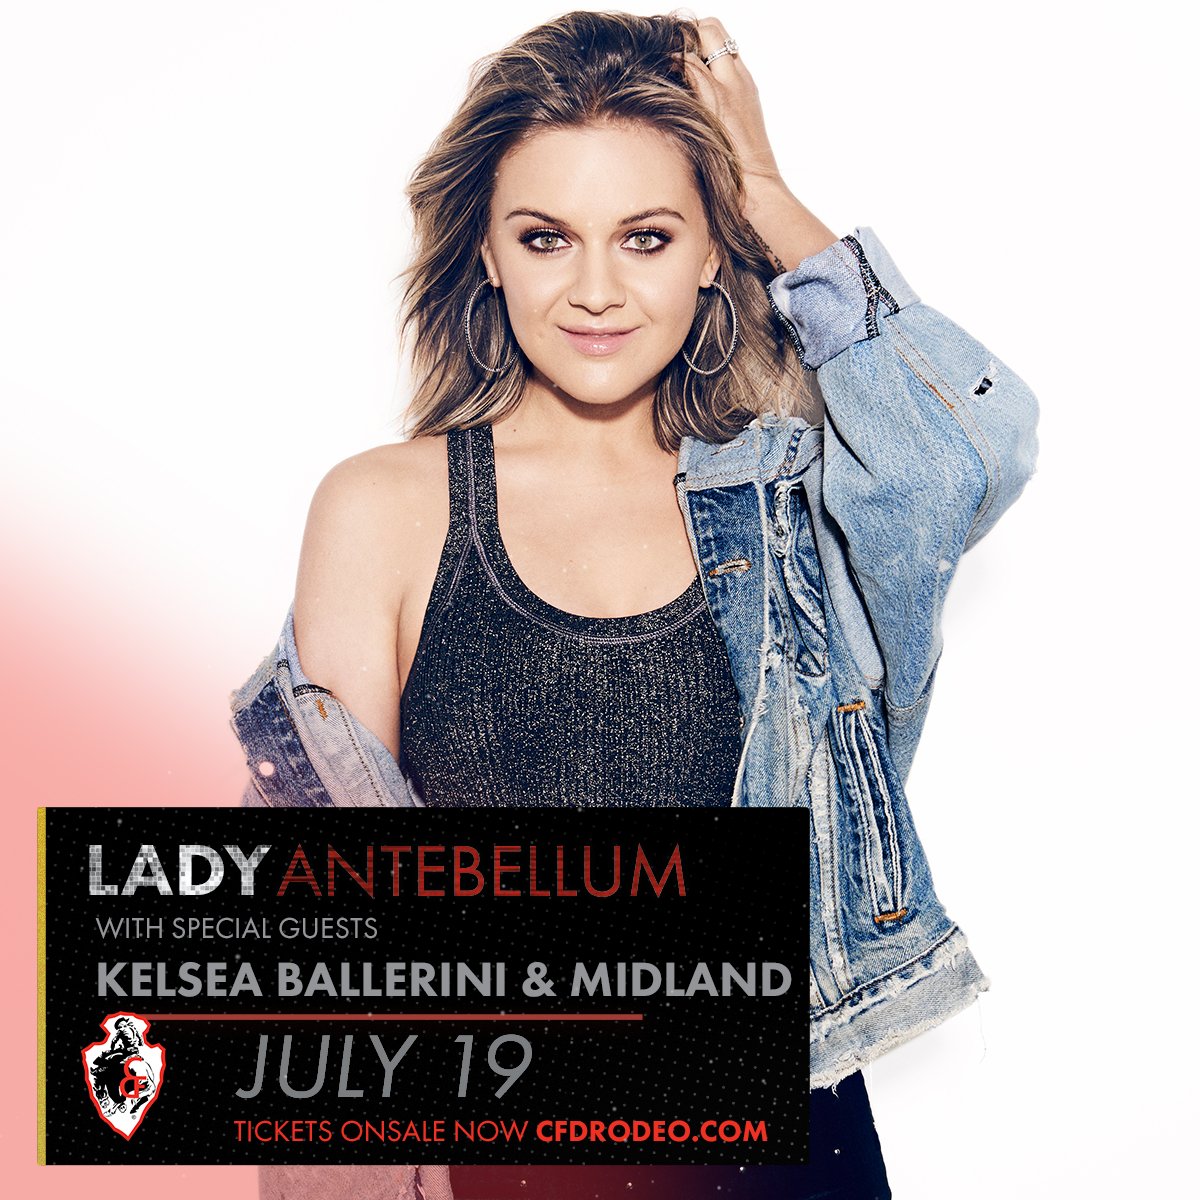 this is gonna be such a fun show!! Can’t wait for the @CheFrontierDays!! tix on sale NOW: bit.ly/CheyenneDaysTix #cfdrodeo